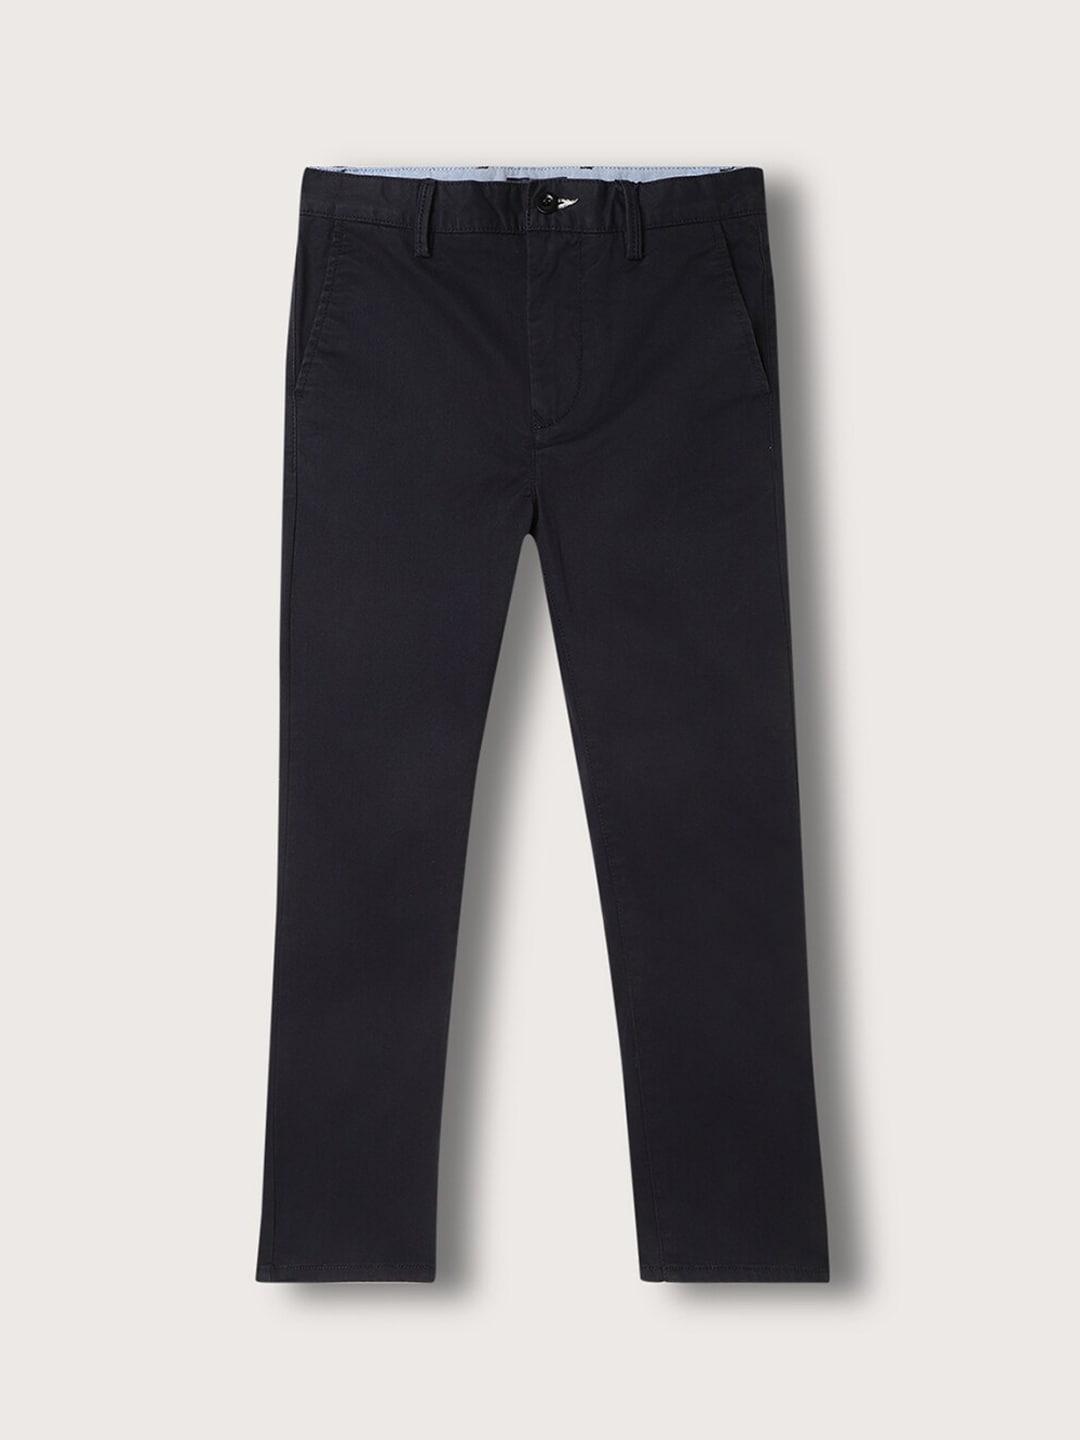 gant-boys-mid-rise-cotton-chinos-trousers